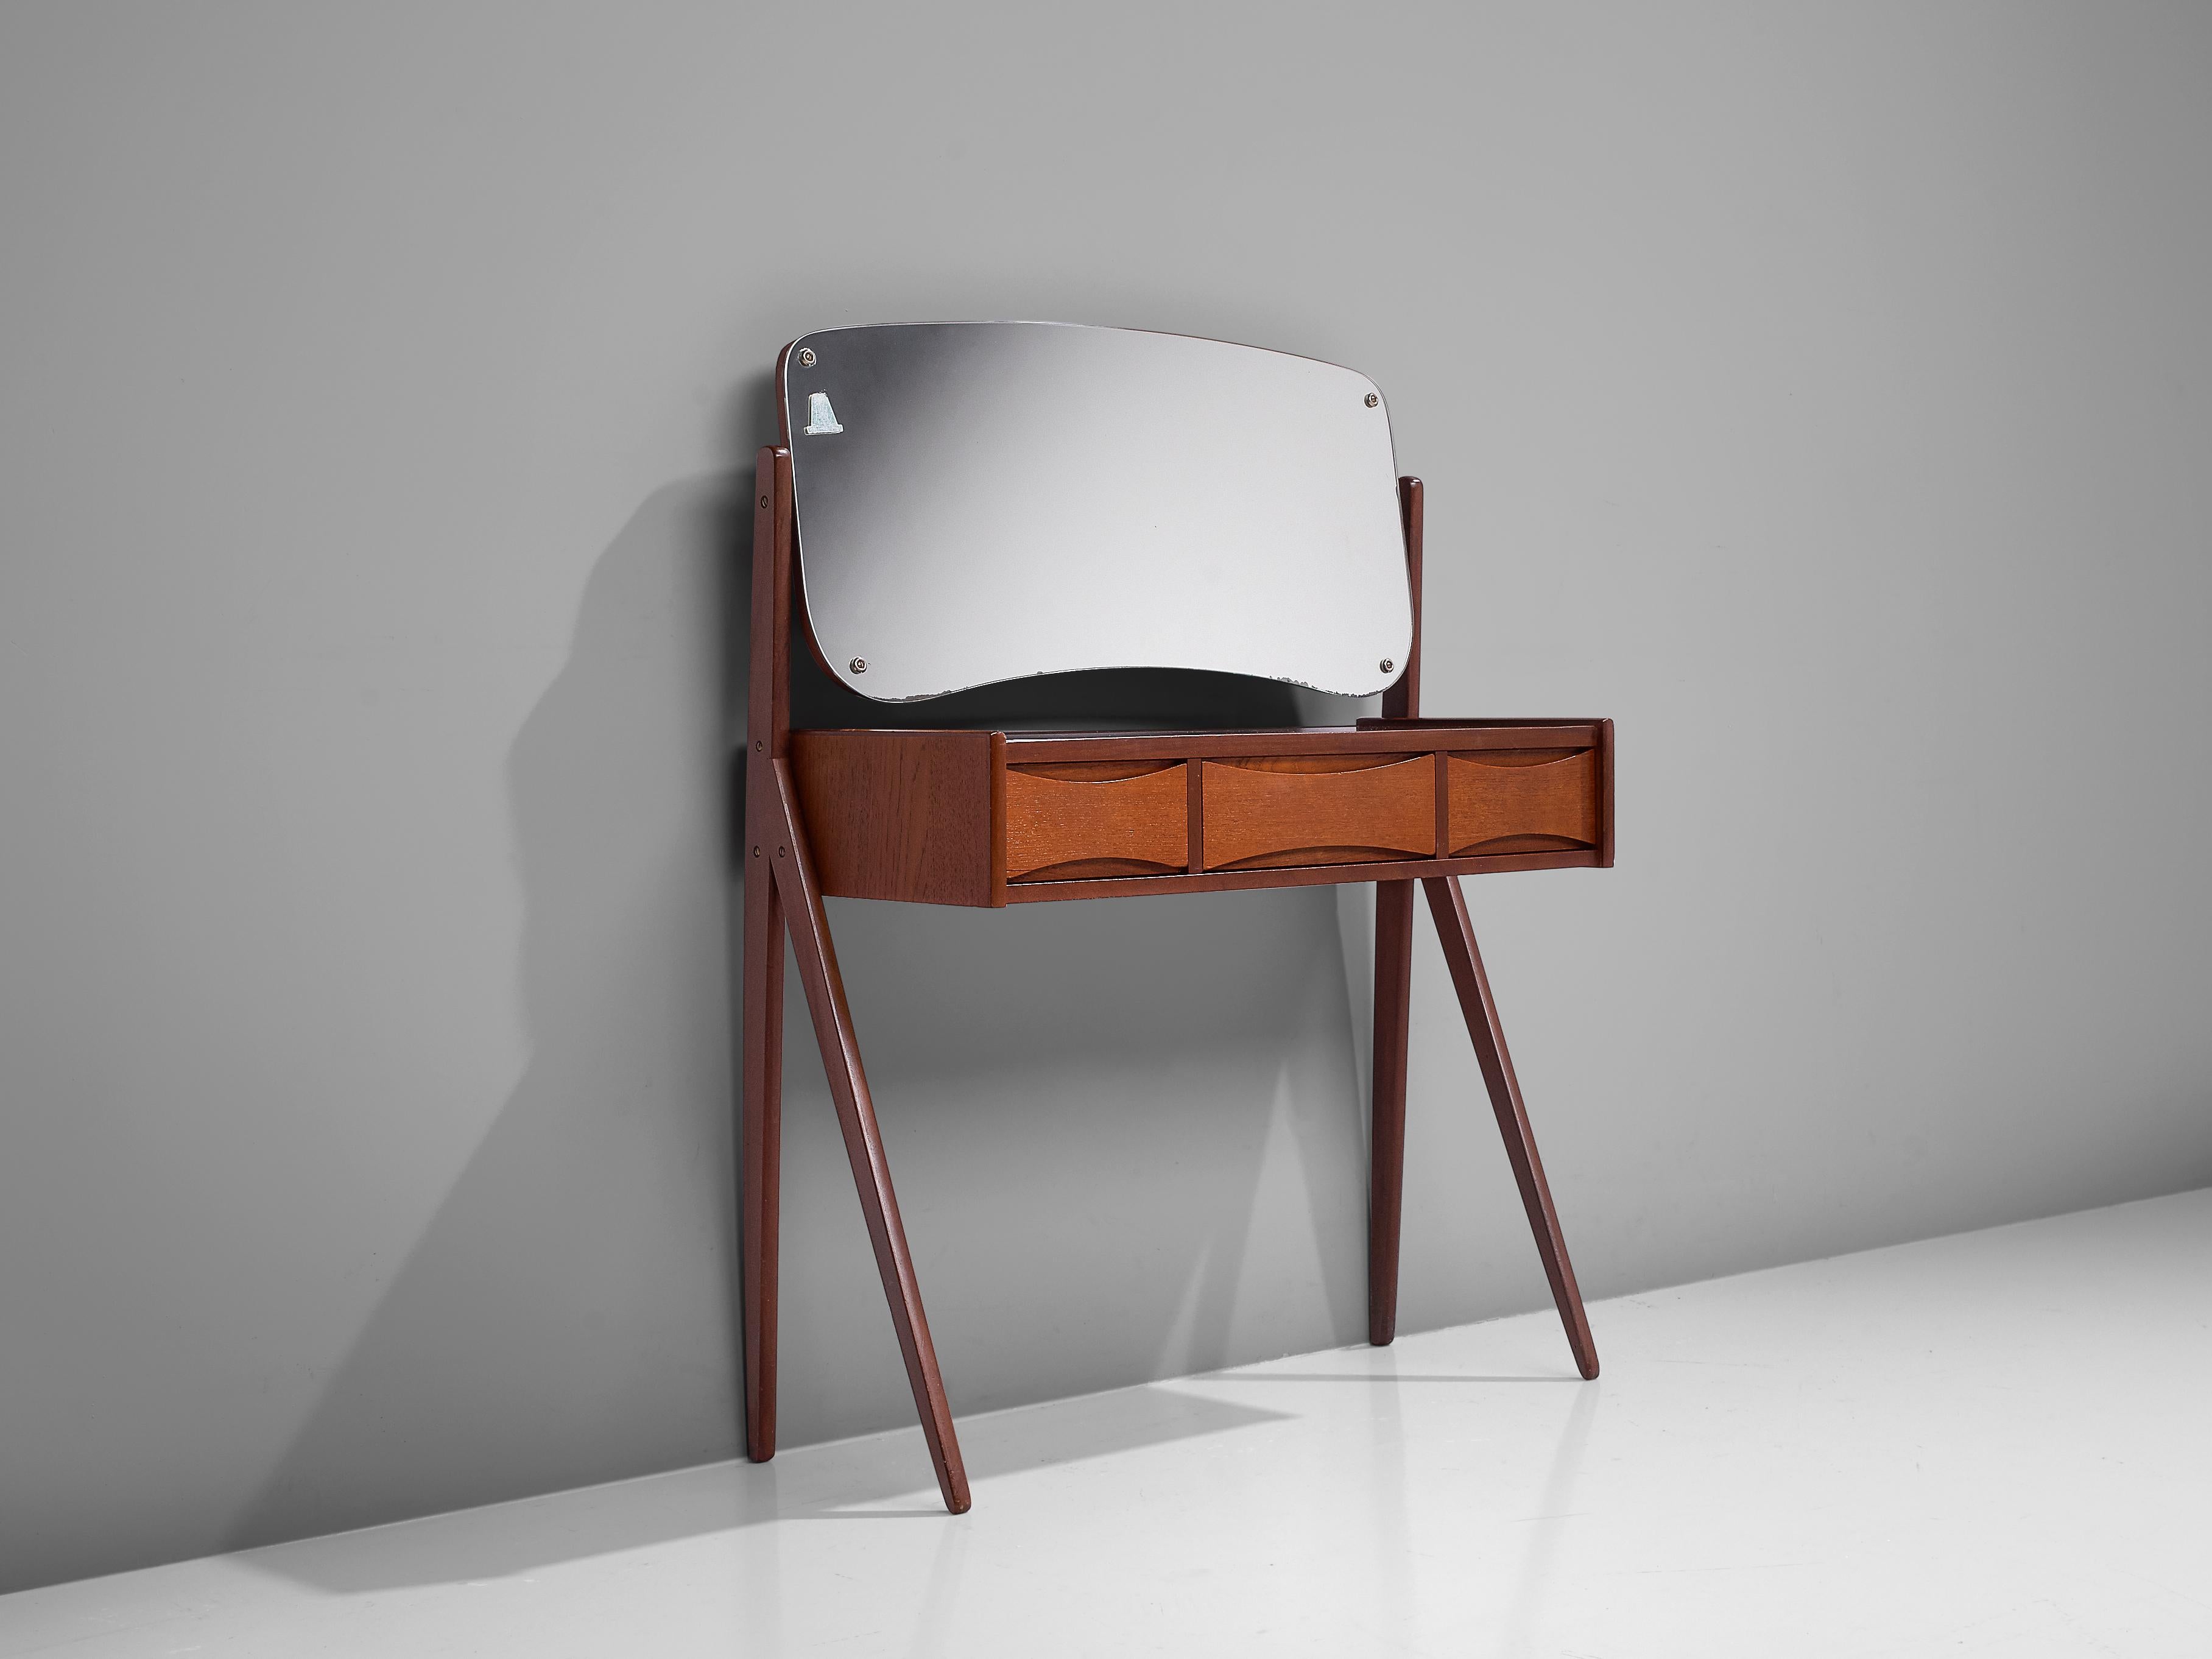 Arne Vodder, vanity table, teak, glass, metal, Denmark, 1950s

This refined, delicate dressing table is designed by Arne Vodder. Two V-shaped tapered legs on the side lift up the drawers and hold the mirror. The rounded edges and the concave shape